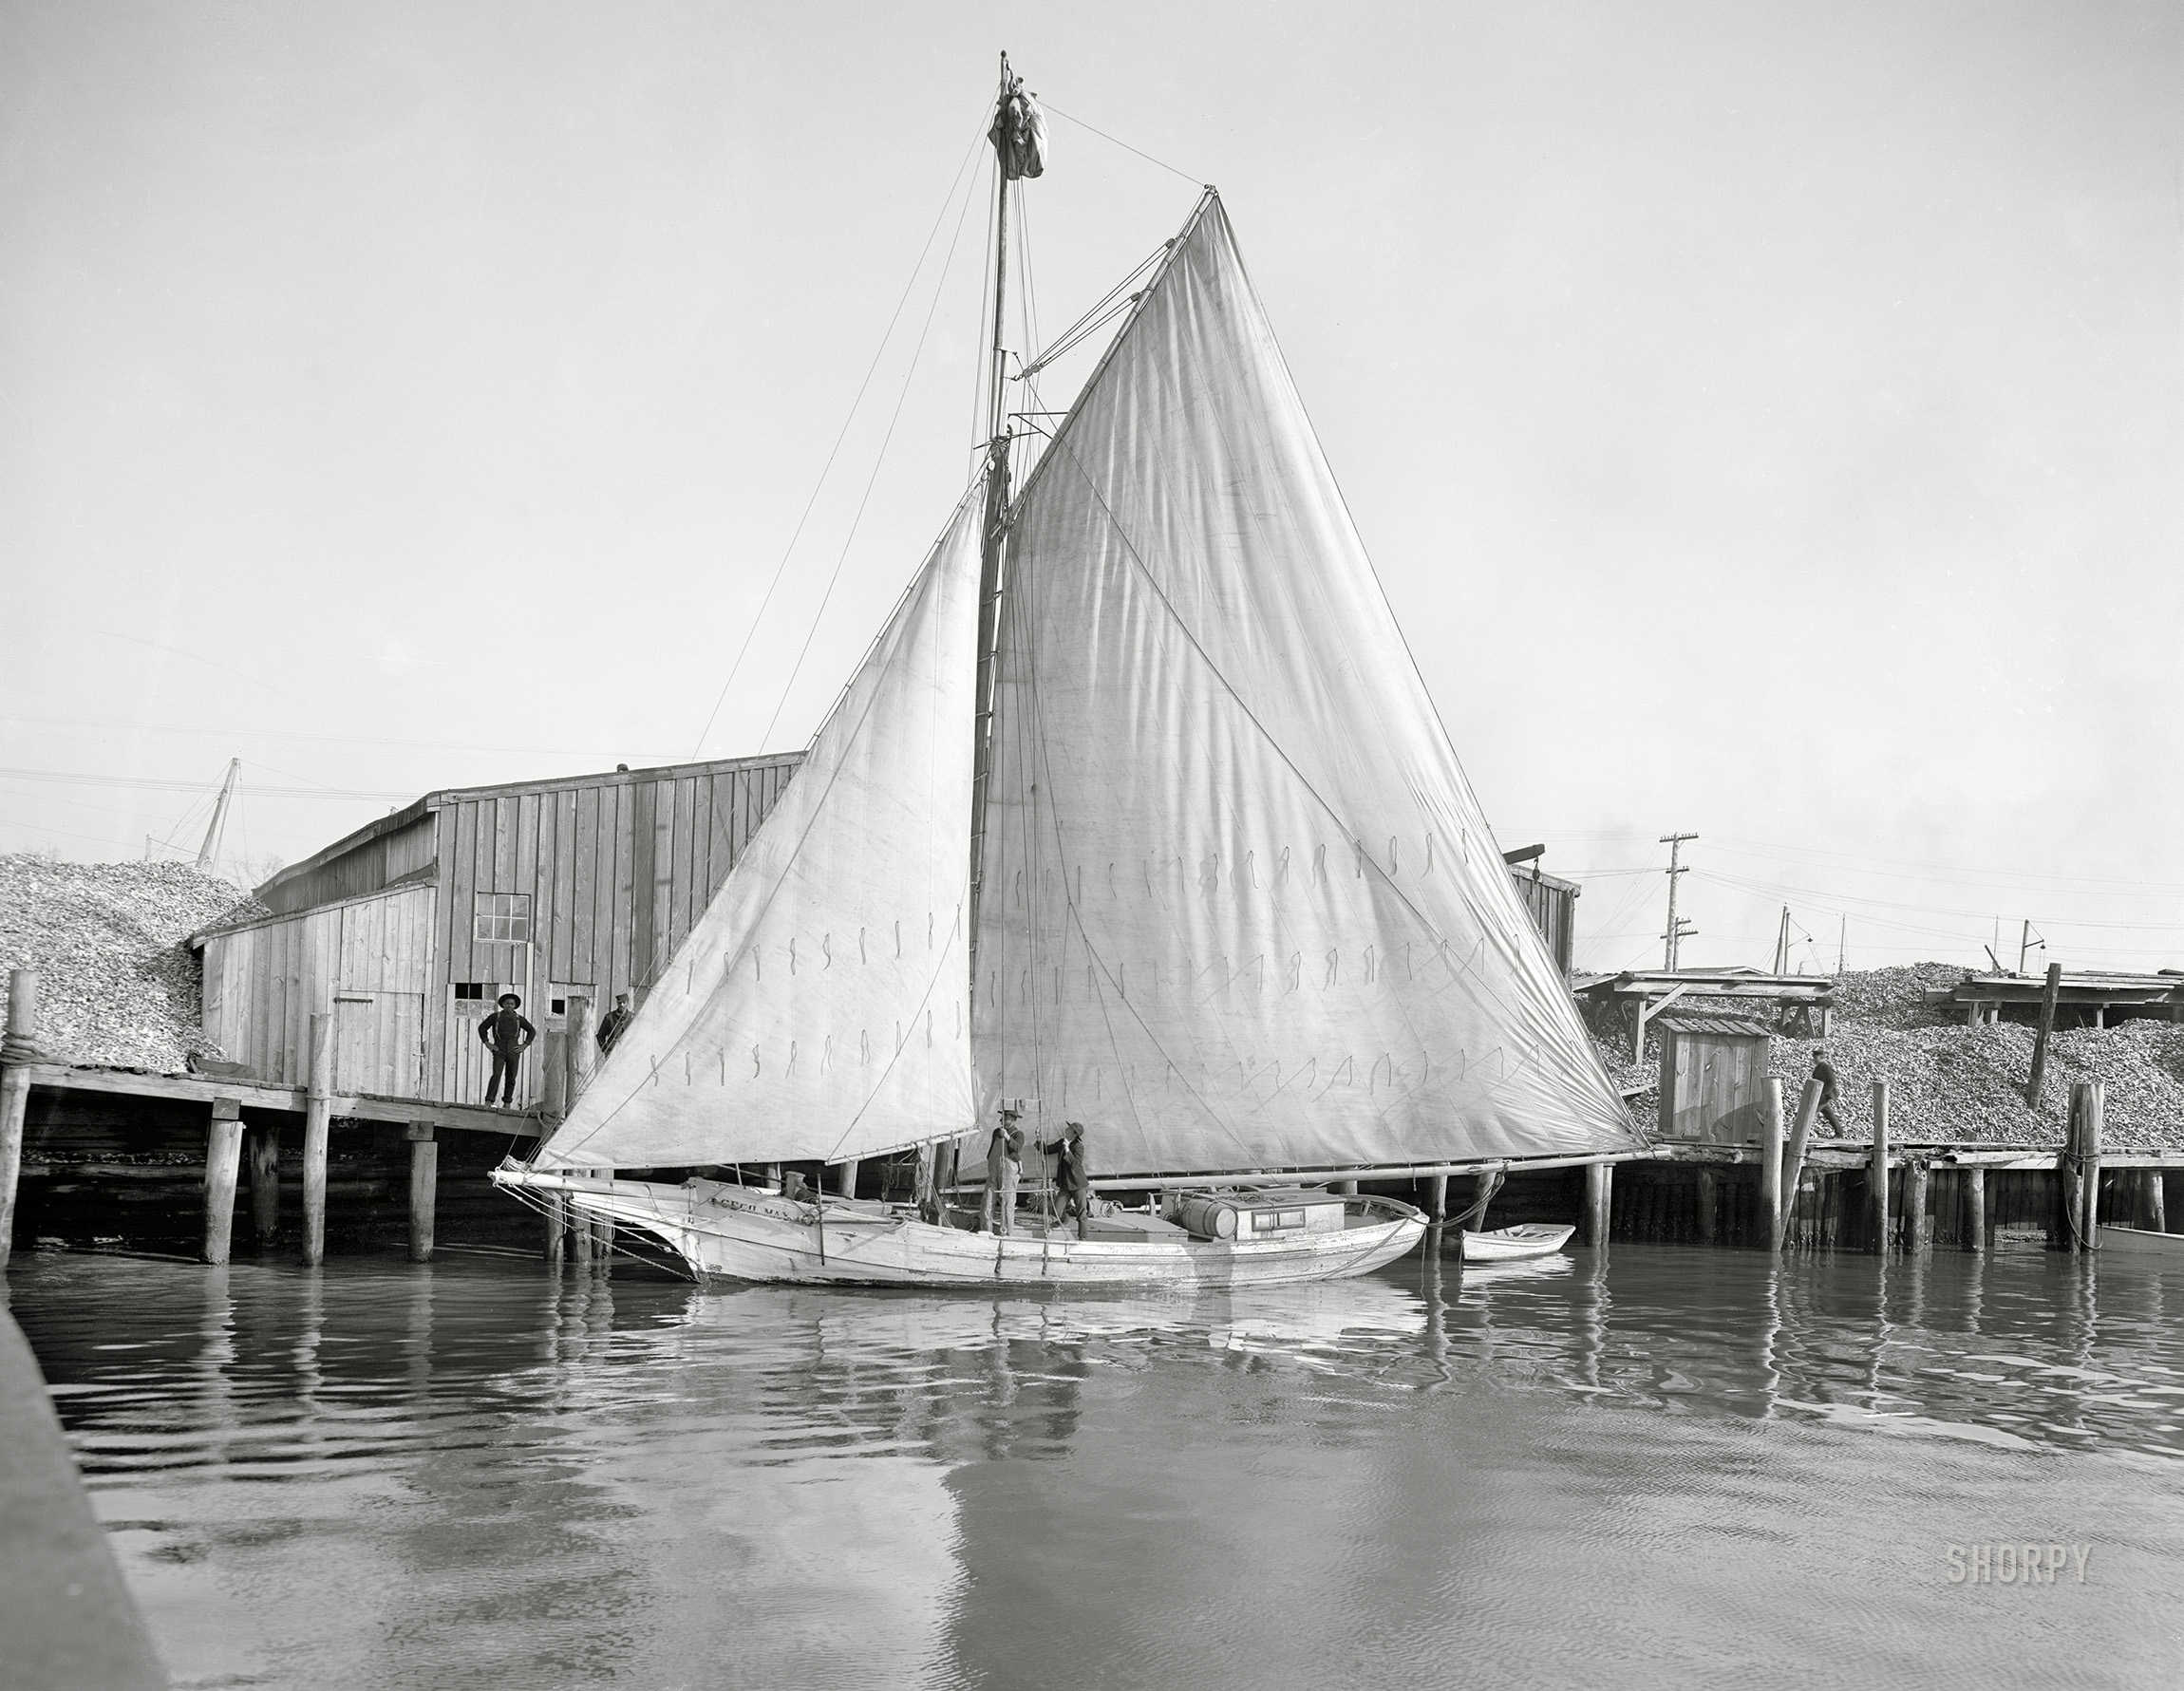 Circa 1905. "An oyster lugger (probably in Virginia)." 8x10 inch dry plate glass negative, Detroit Publishing Company. View full size.